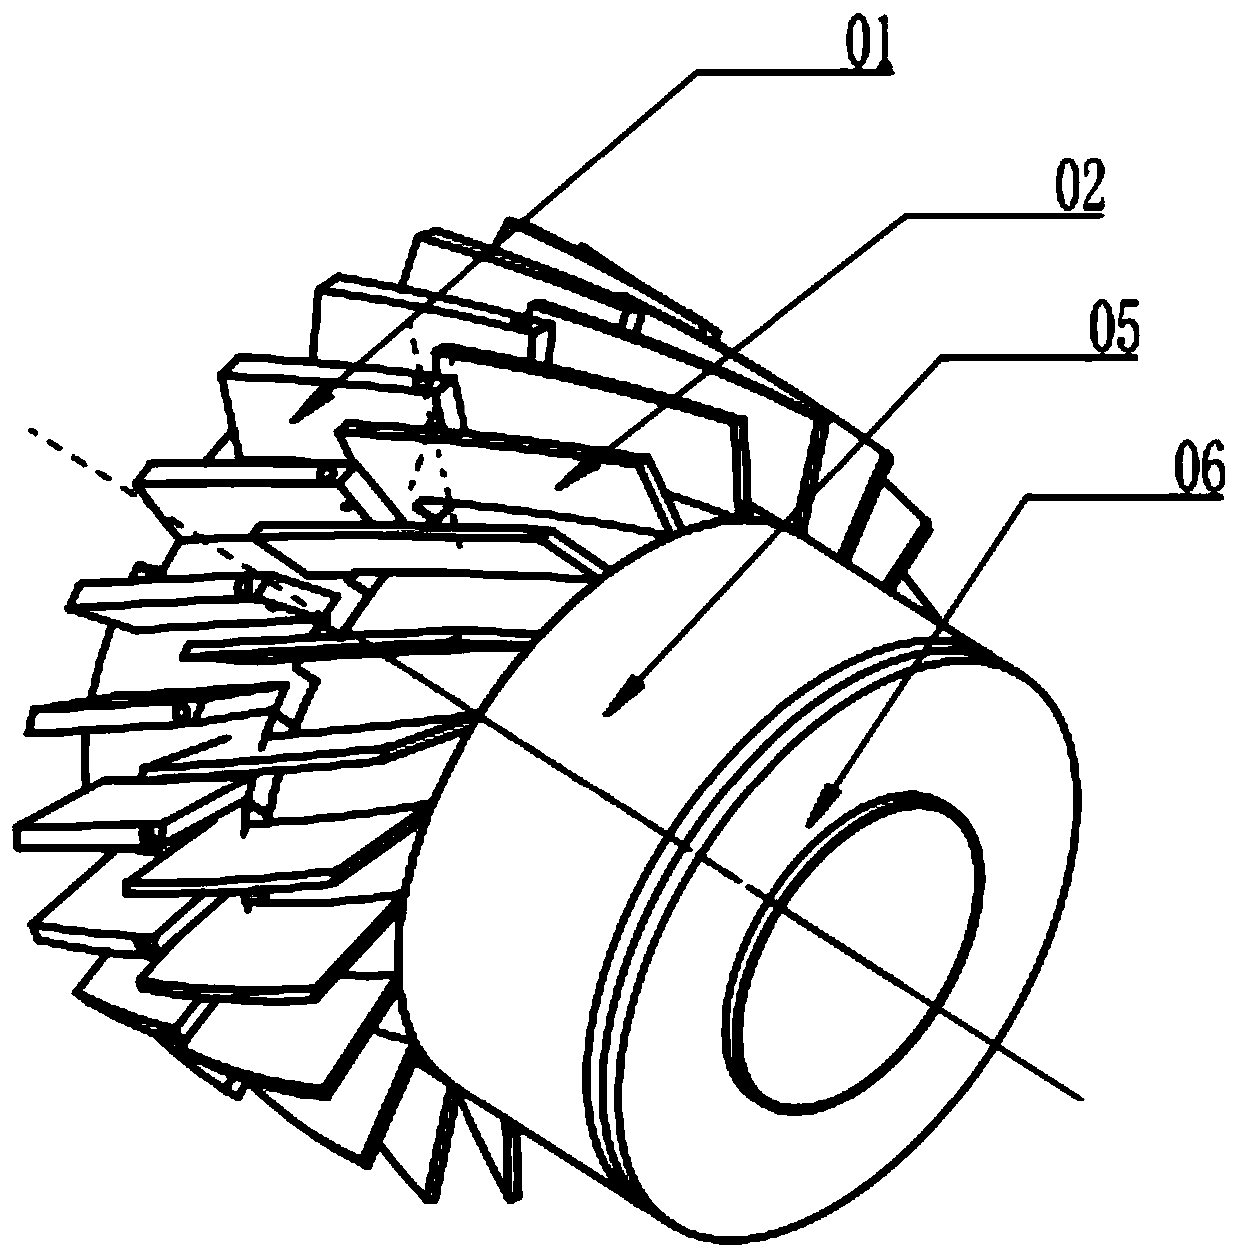 A low-emission combustor head with an axial swirl pre-diaphragm plate matching blade injection structure in the main combustion stage